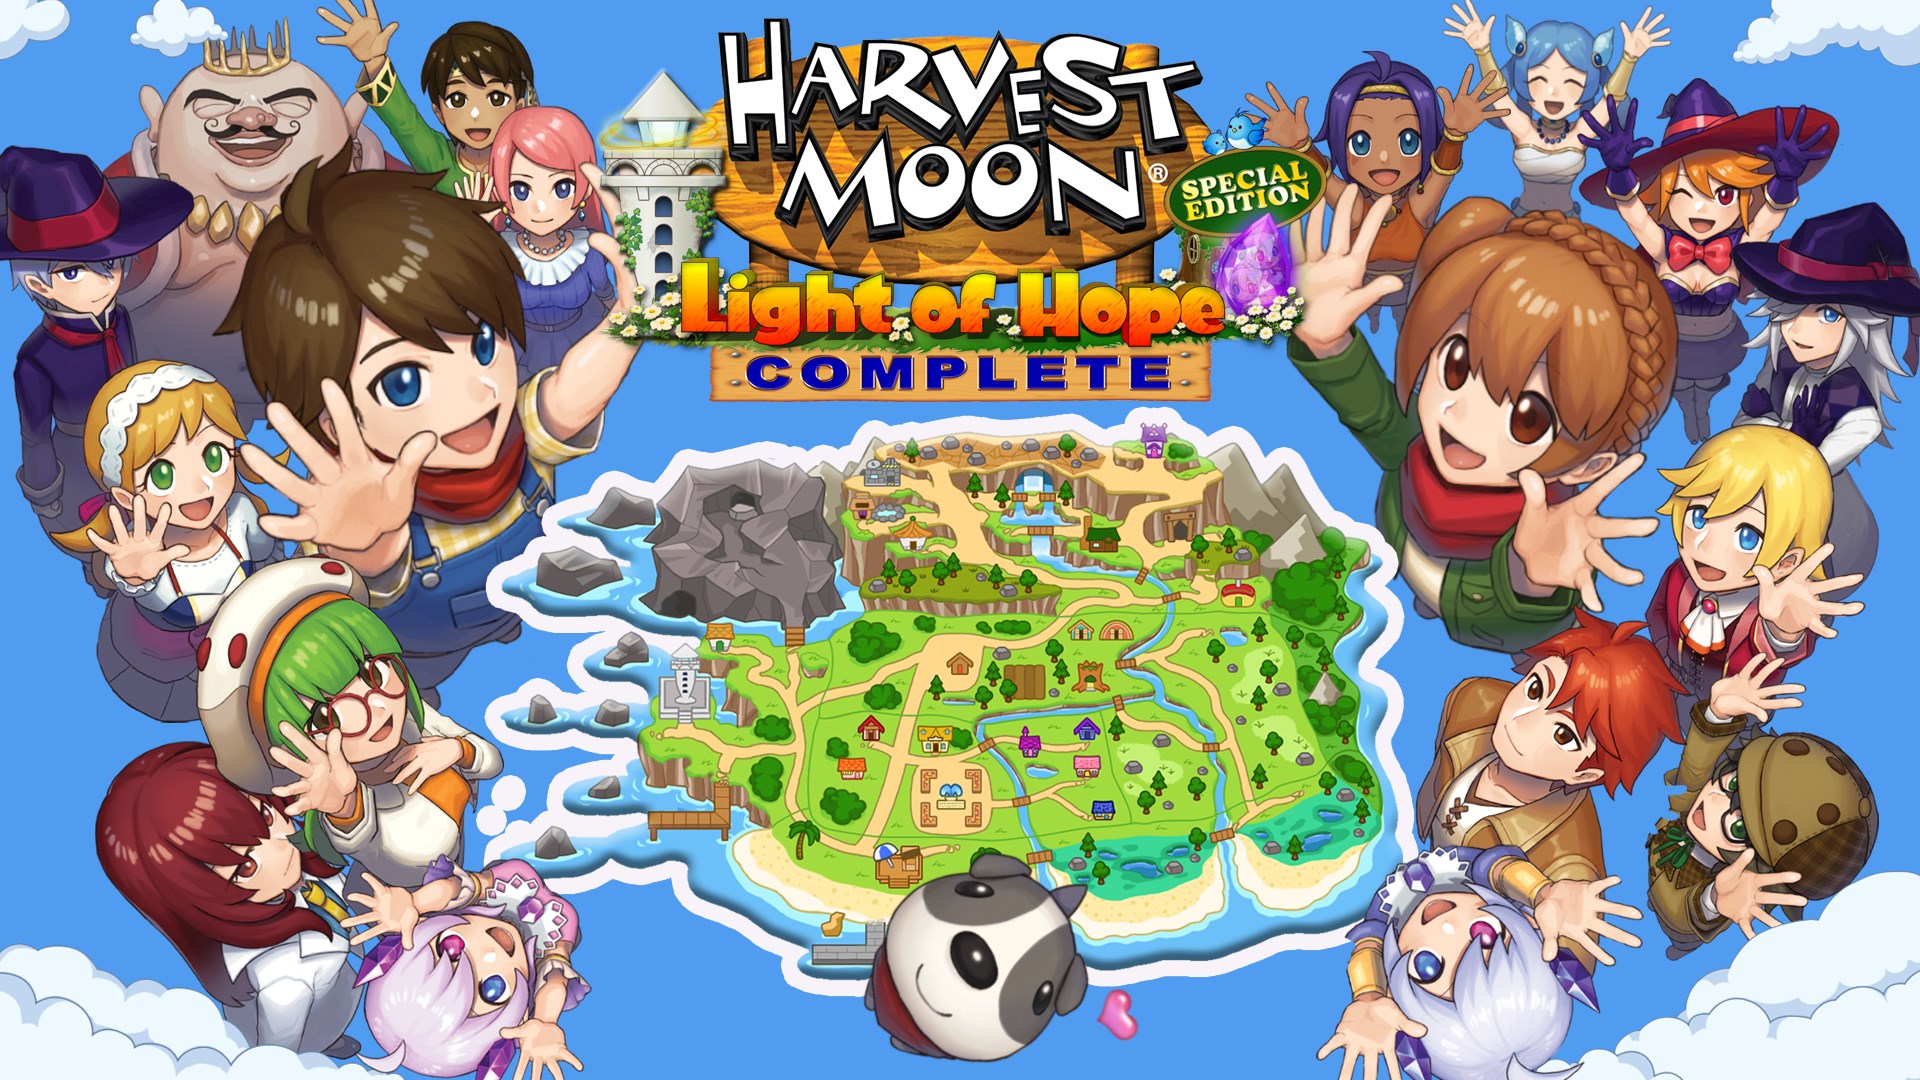 Find the best computers for Harvest Moon: Light of Hope SE Complete